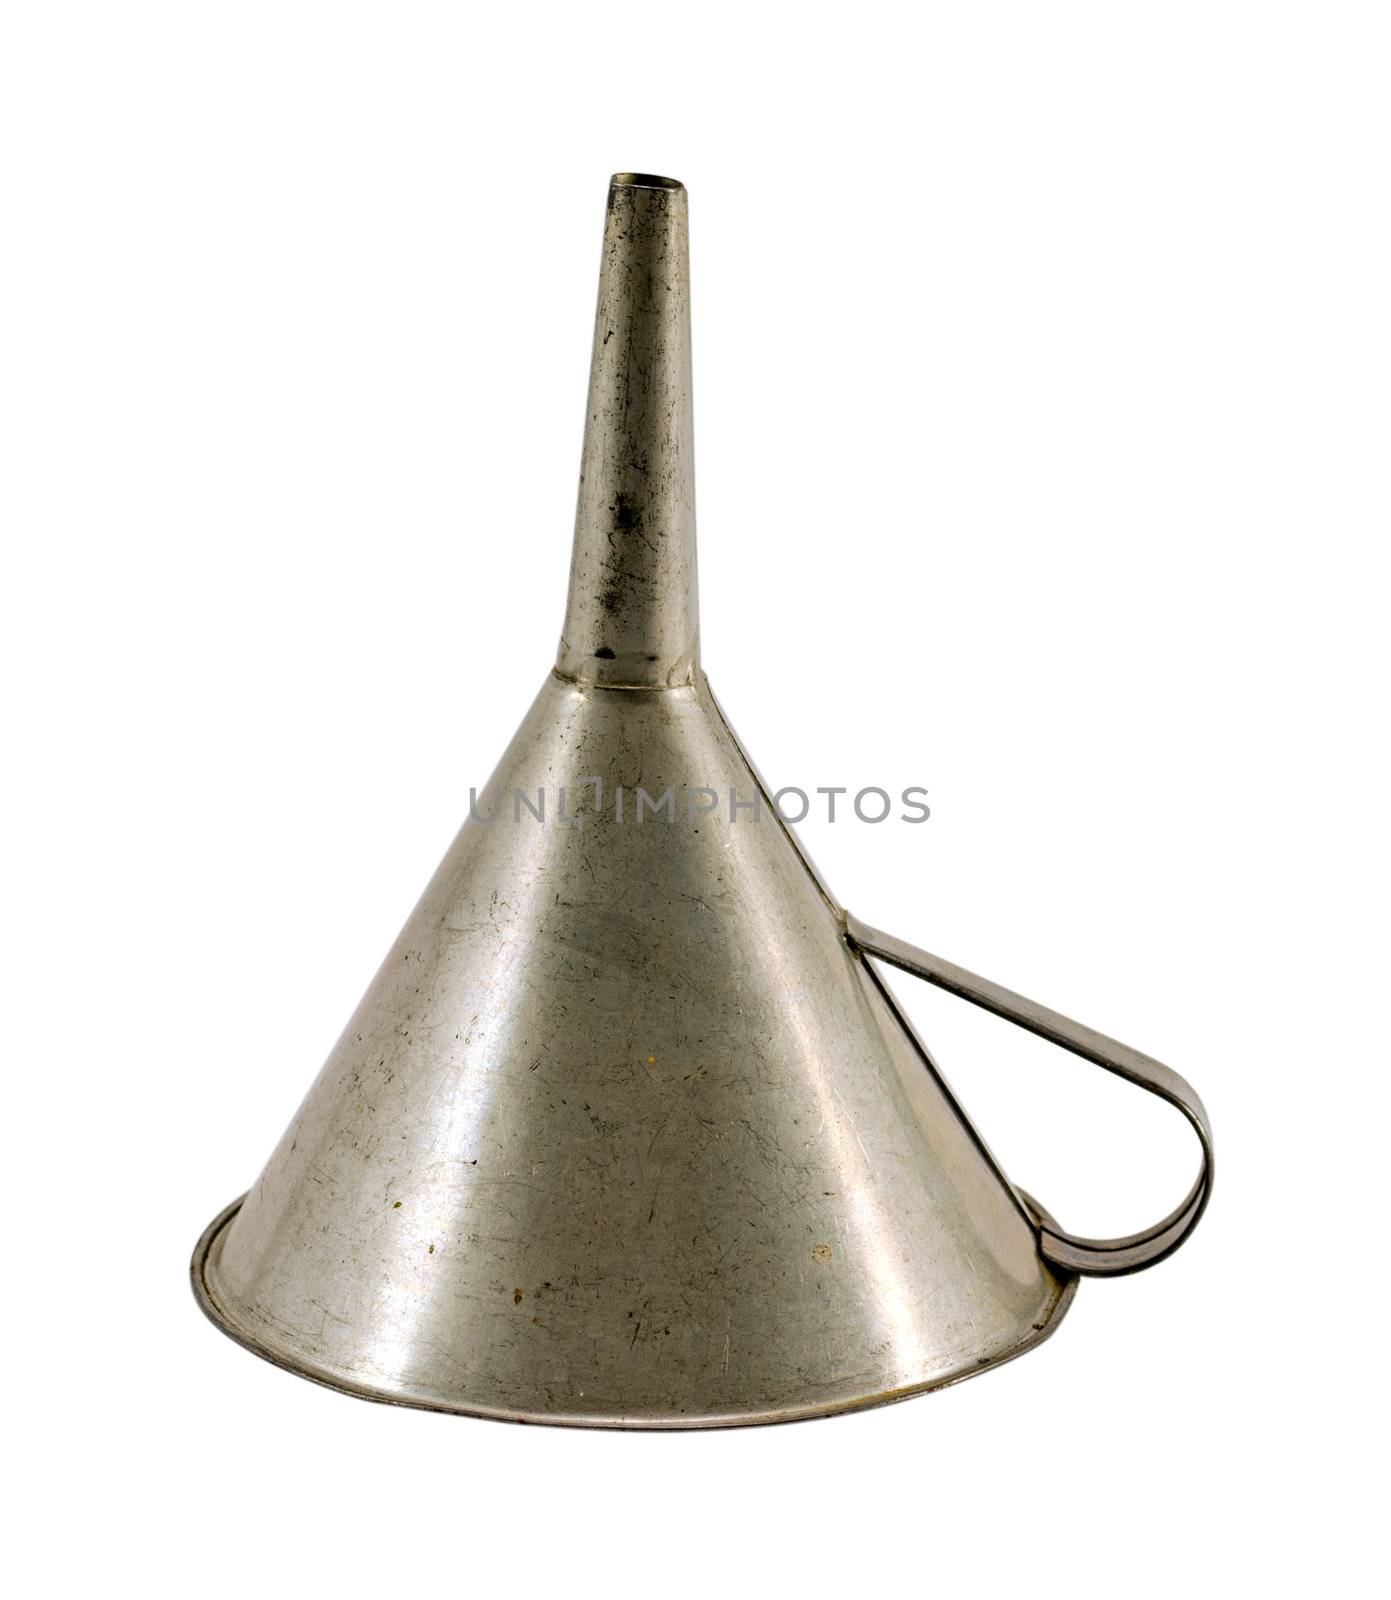 retro metal funnel hopper tool isolated on white background